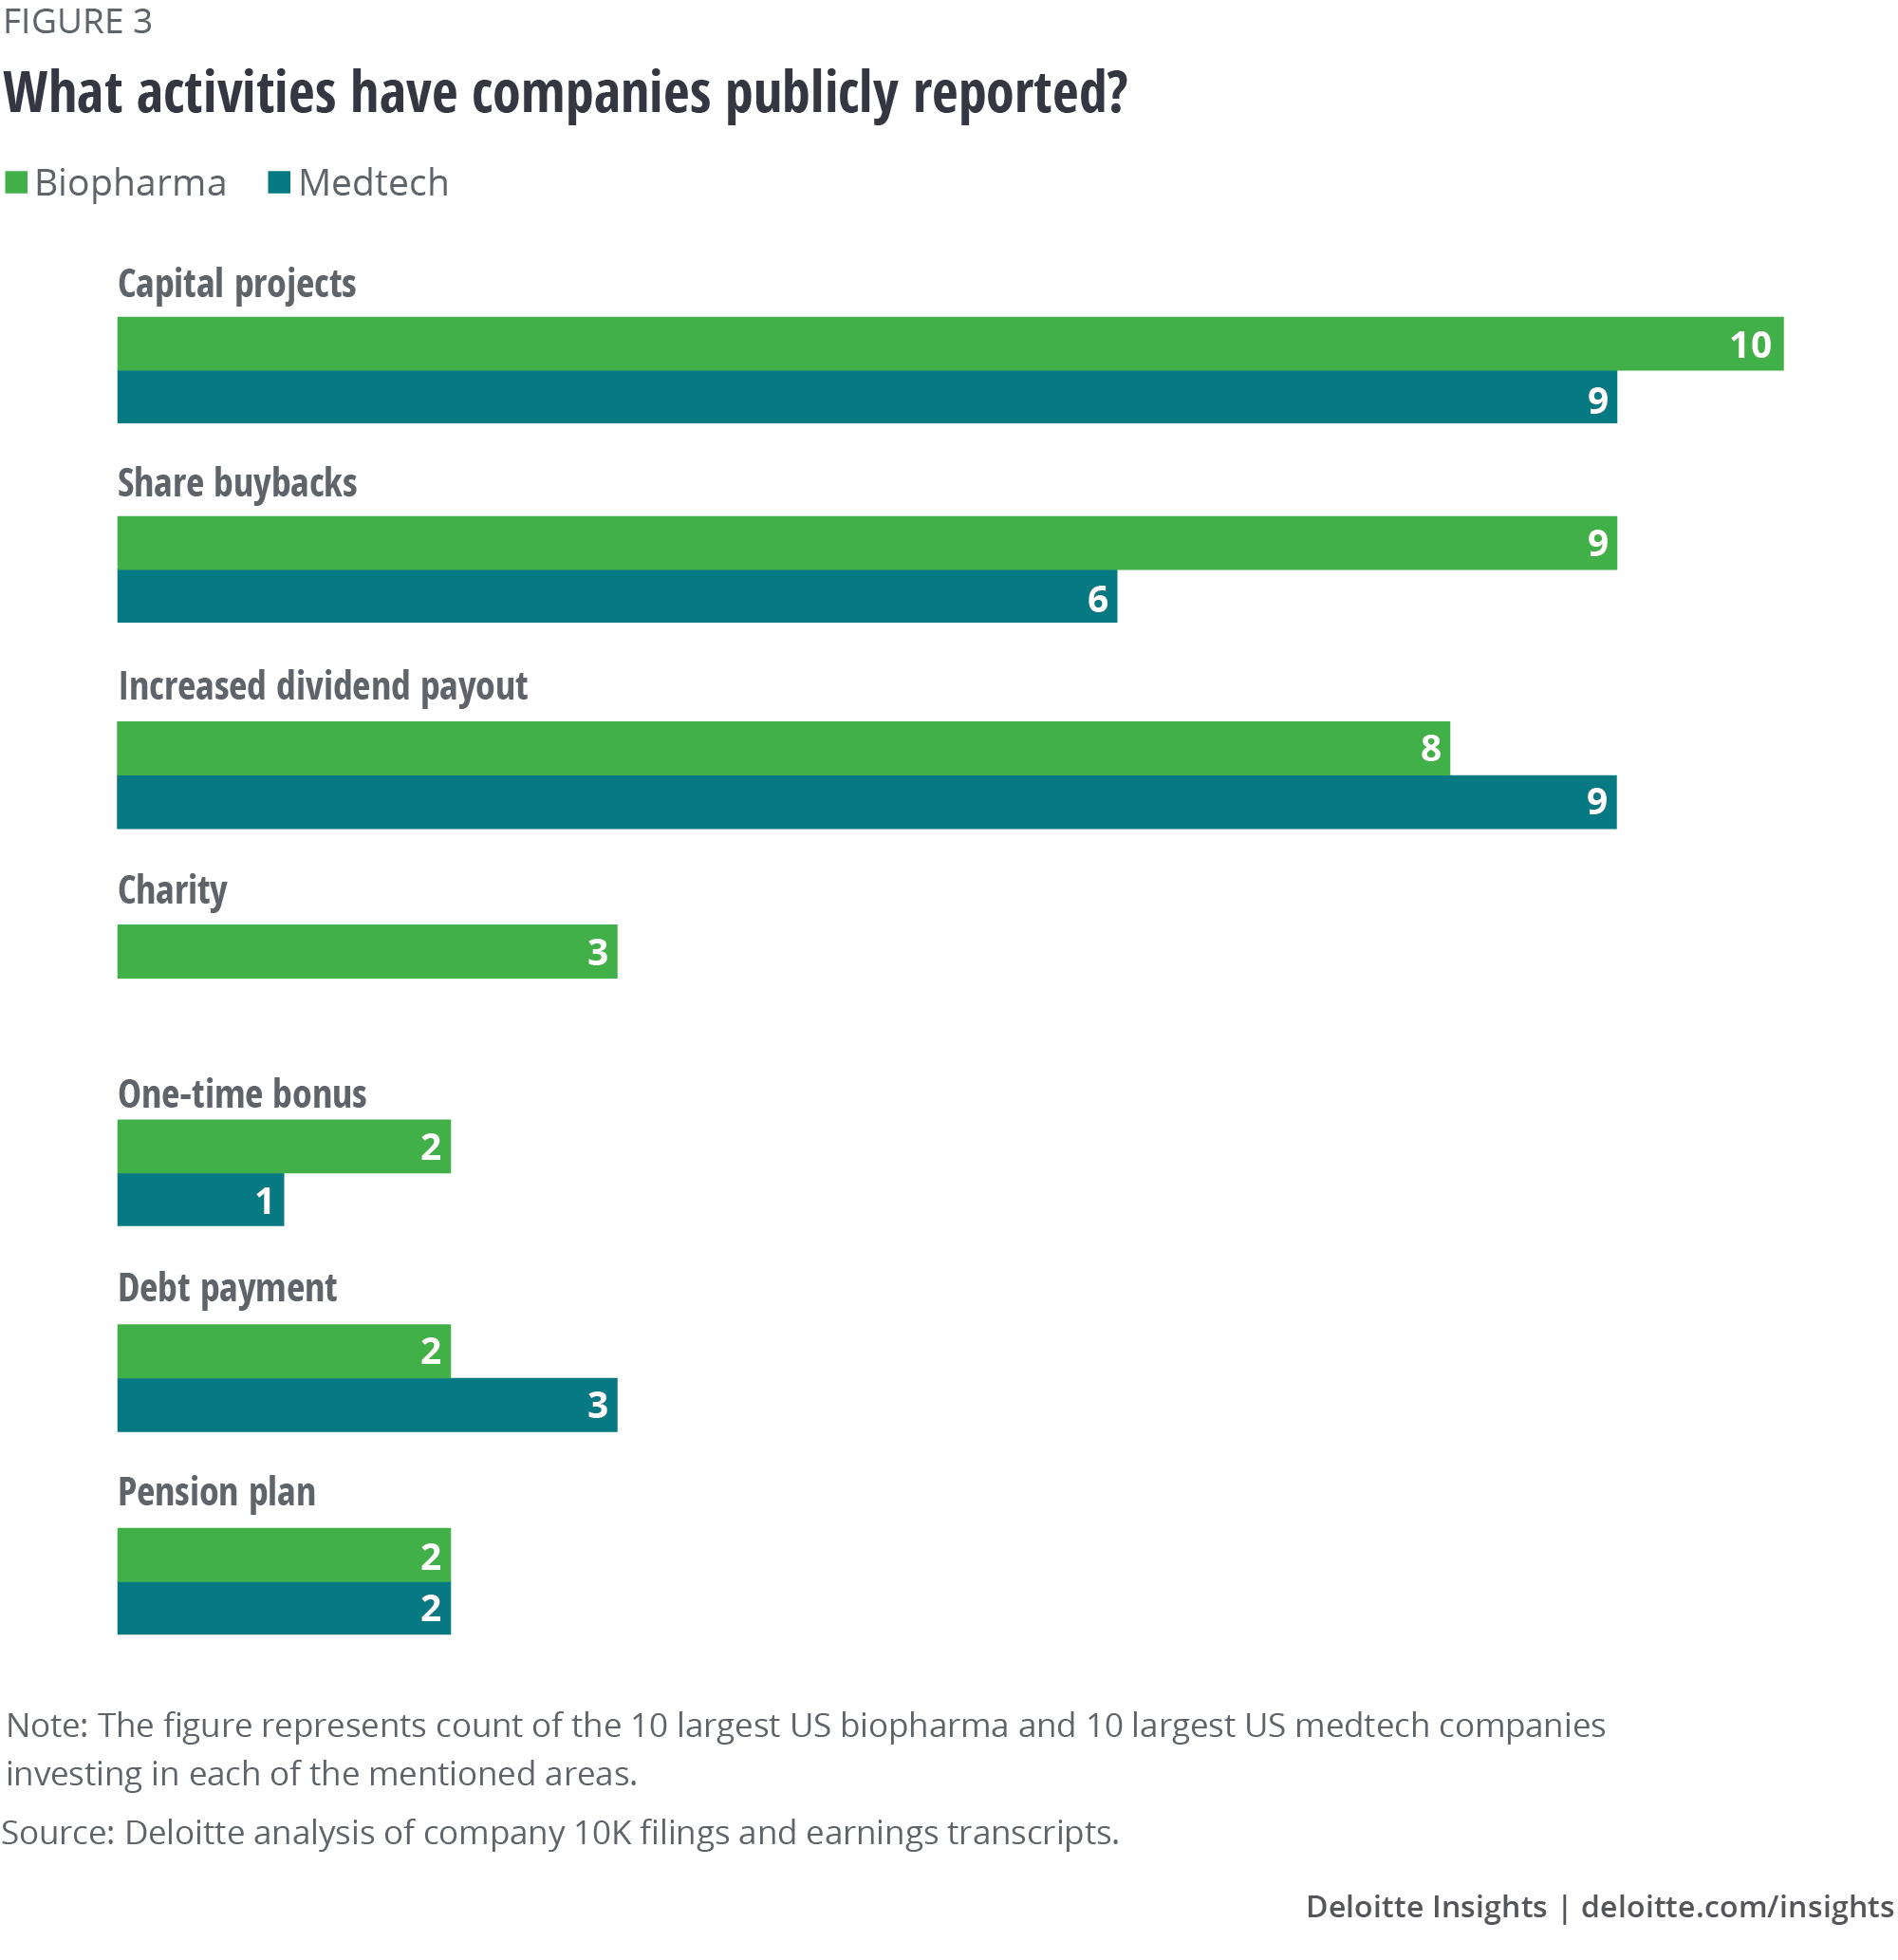 What activities have companies publicly reported?